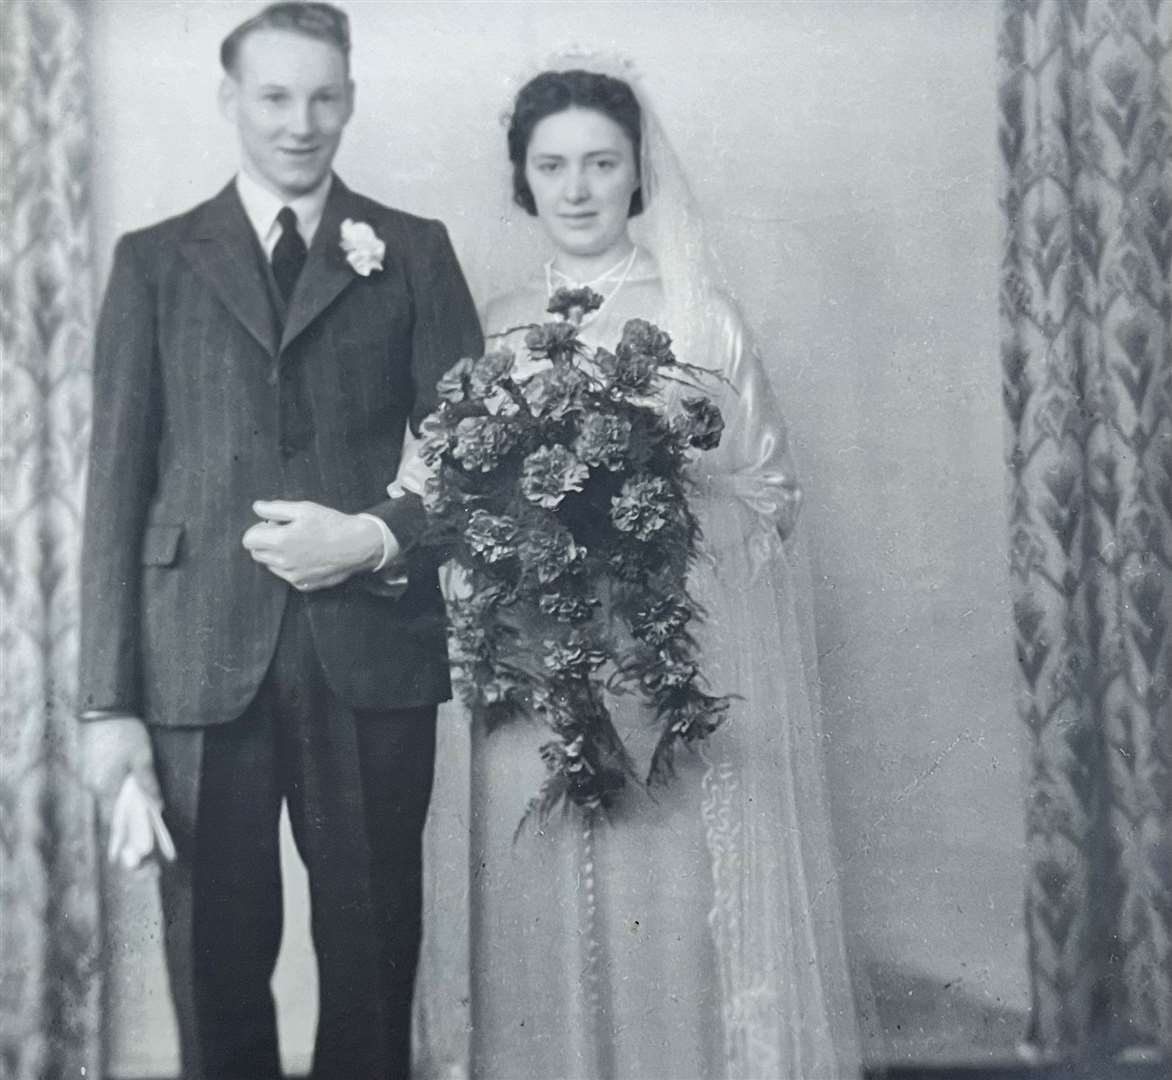 Dorothy and Tim Walter, both aged 21 on their wedding day in 1942. Picture: Walter family